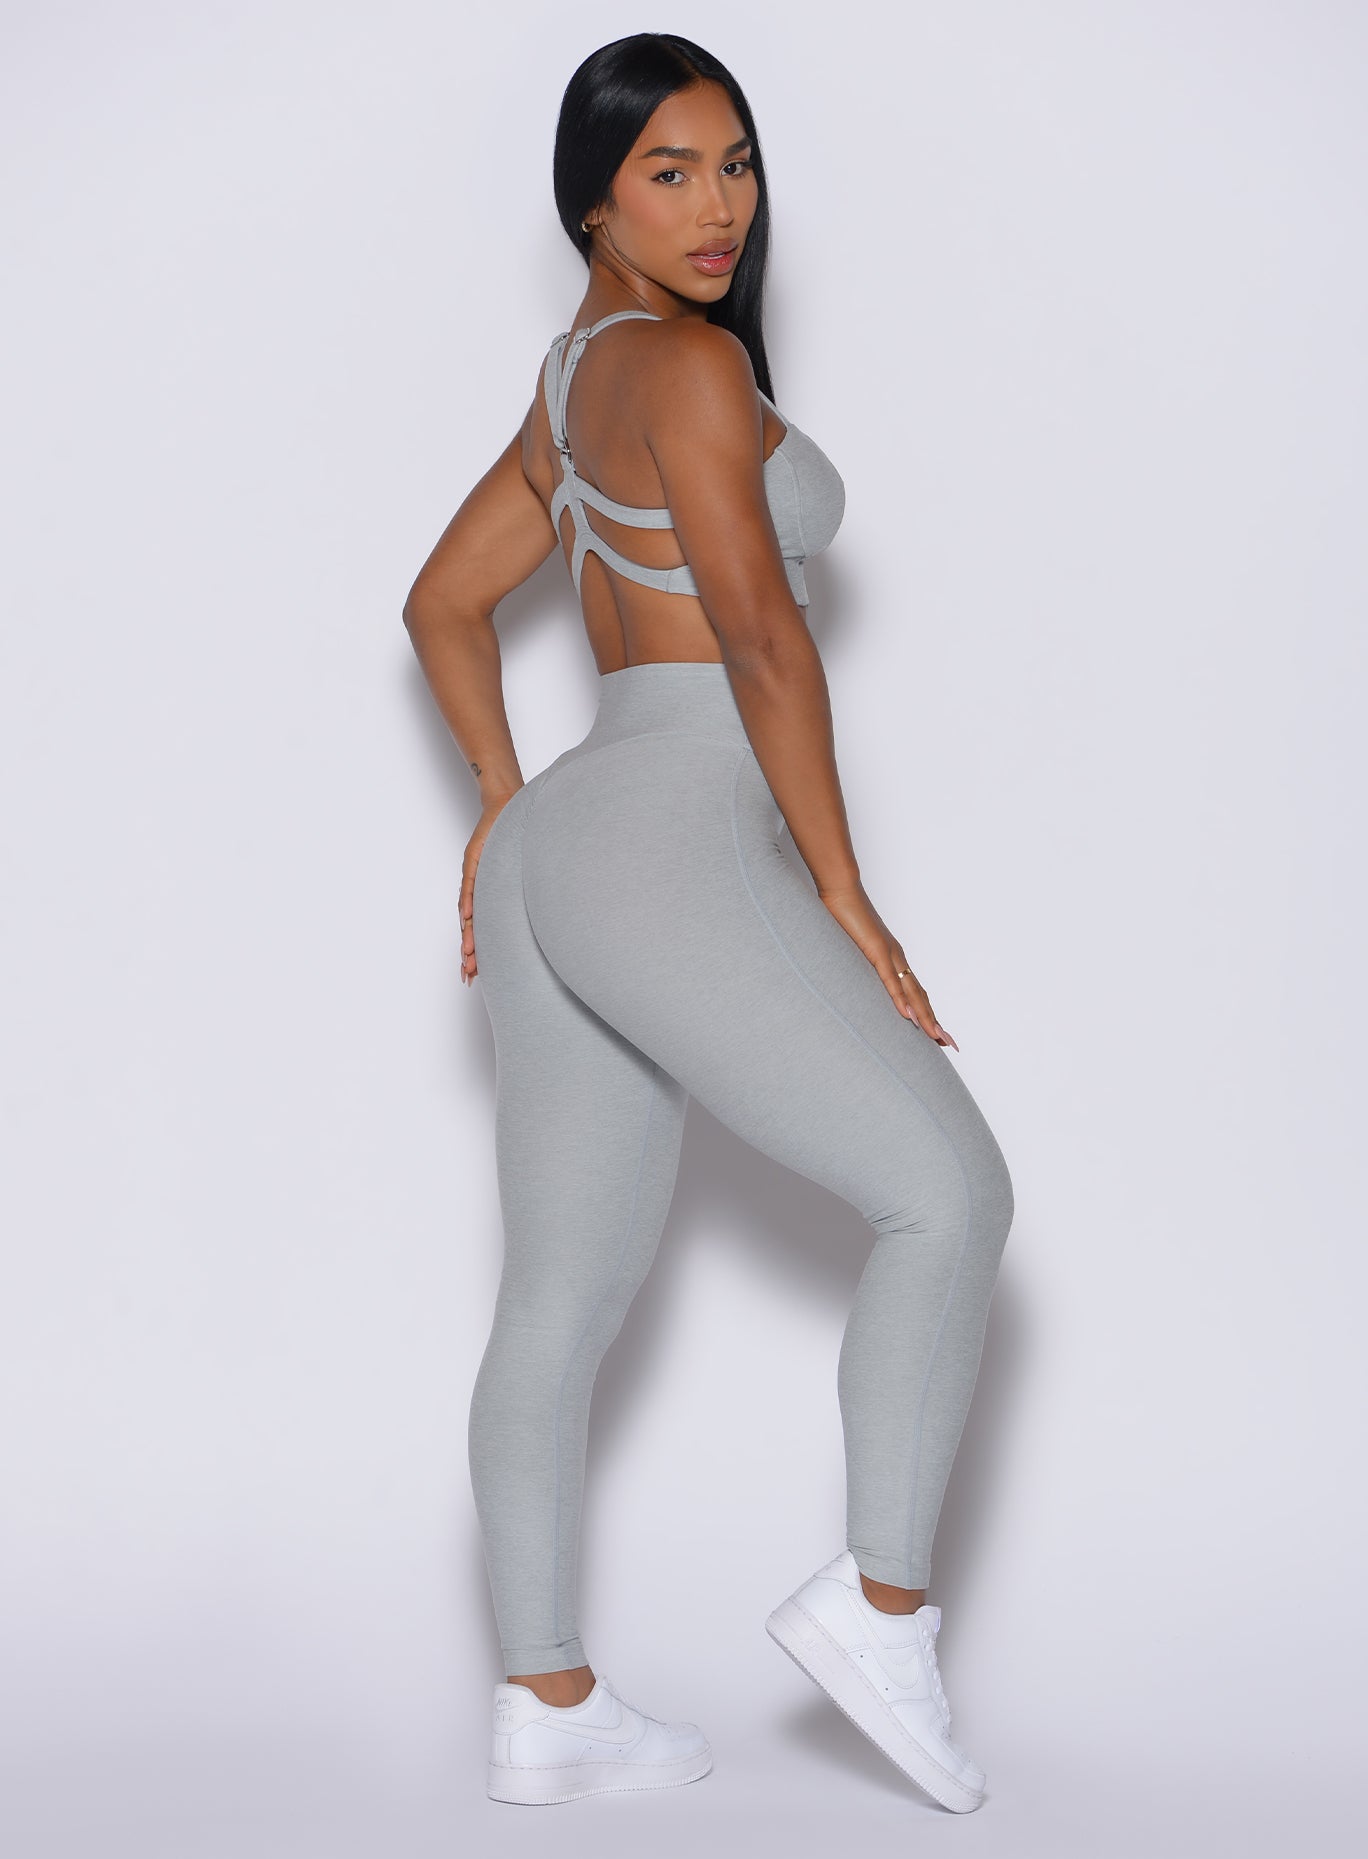 Right side view of a model facing to her right wearing our Movement Leggings in Light Cloud color and a matching Sports Bra